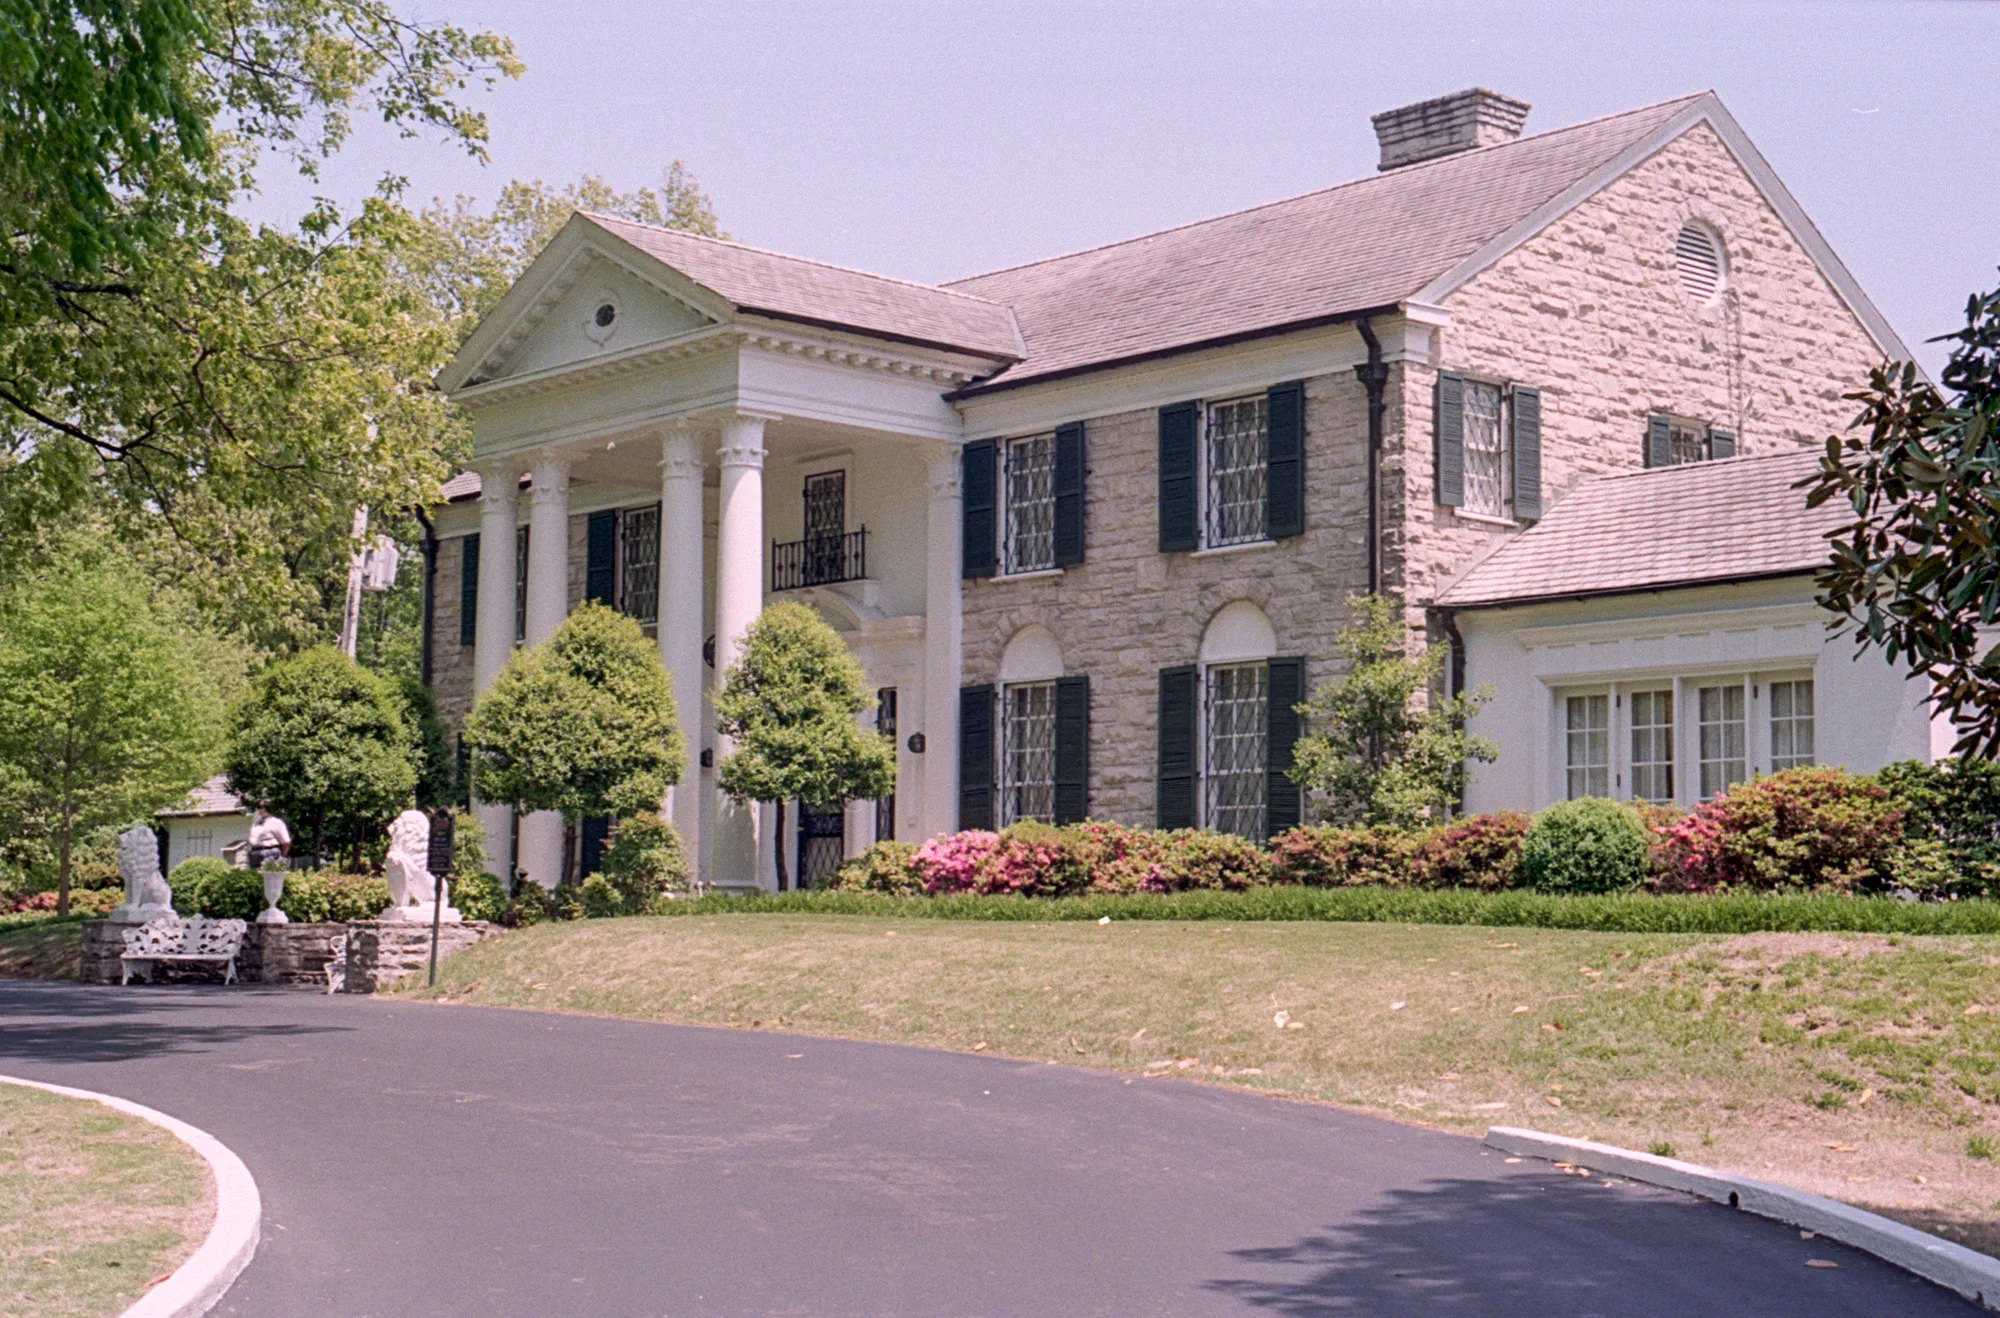 Graceland, Home of the King